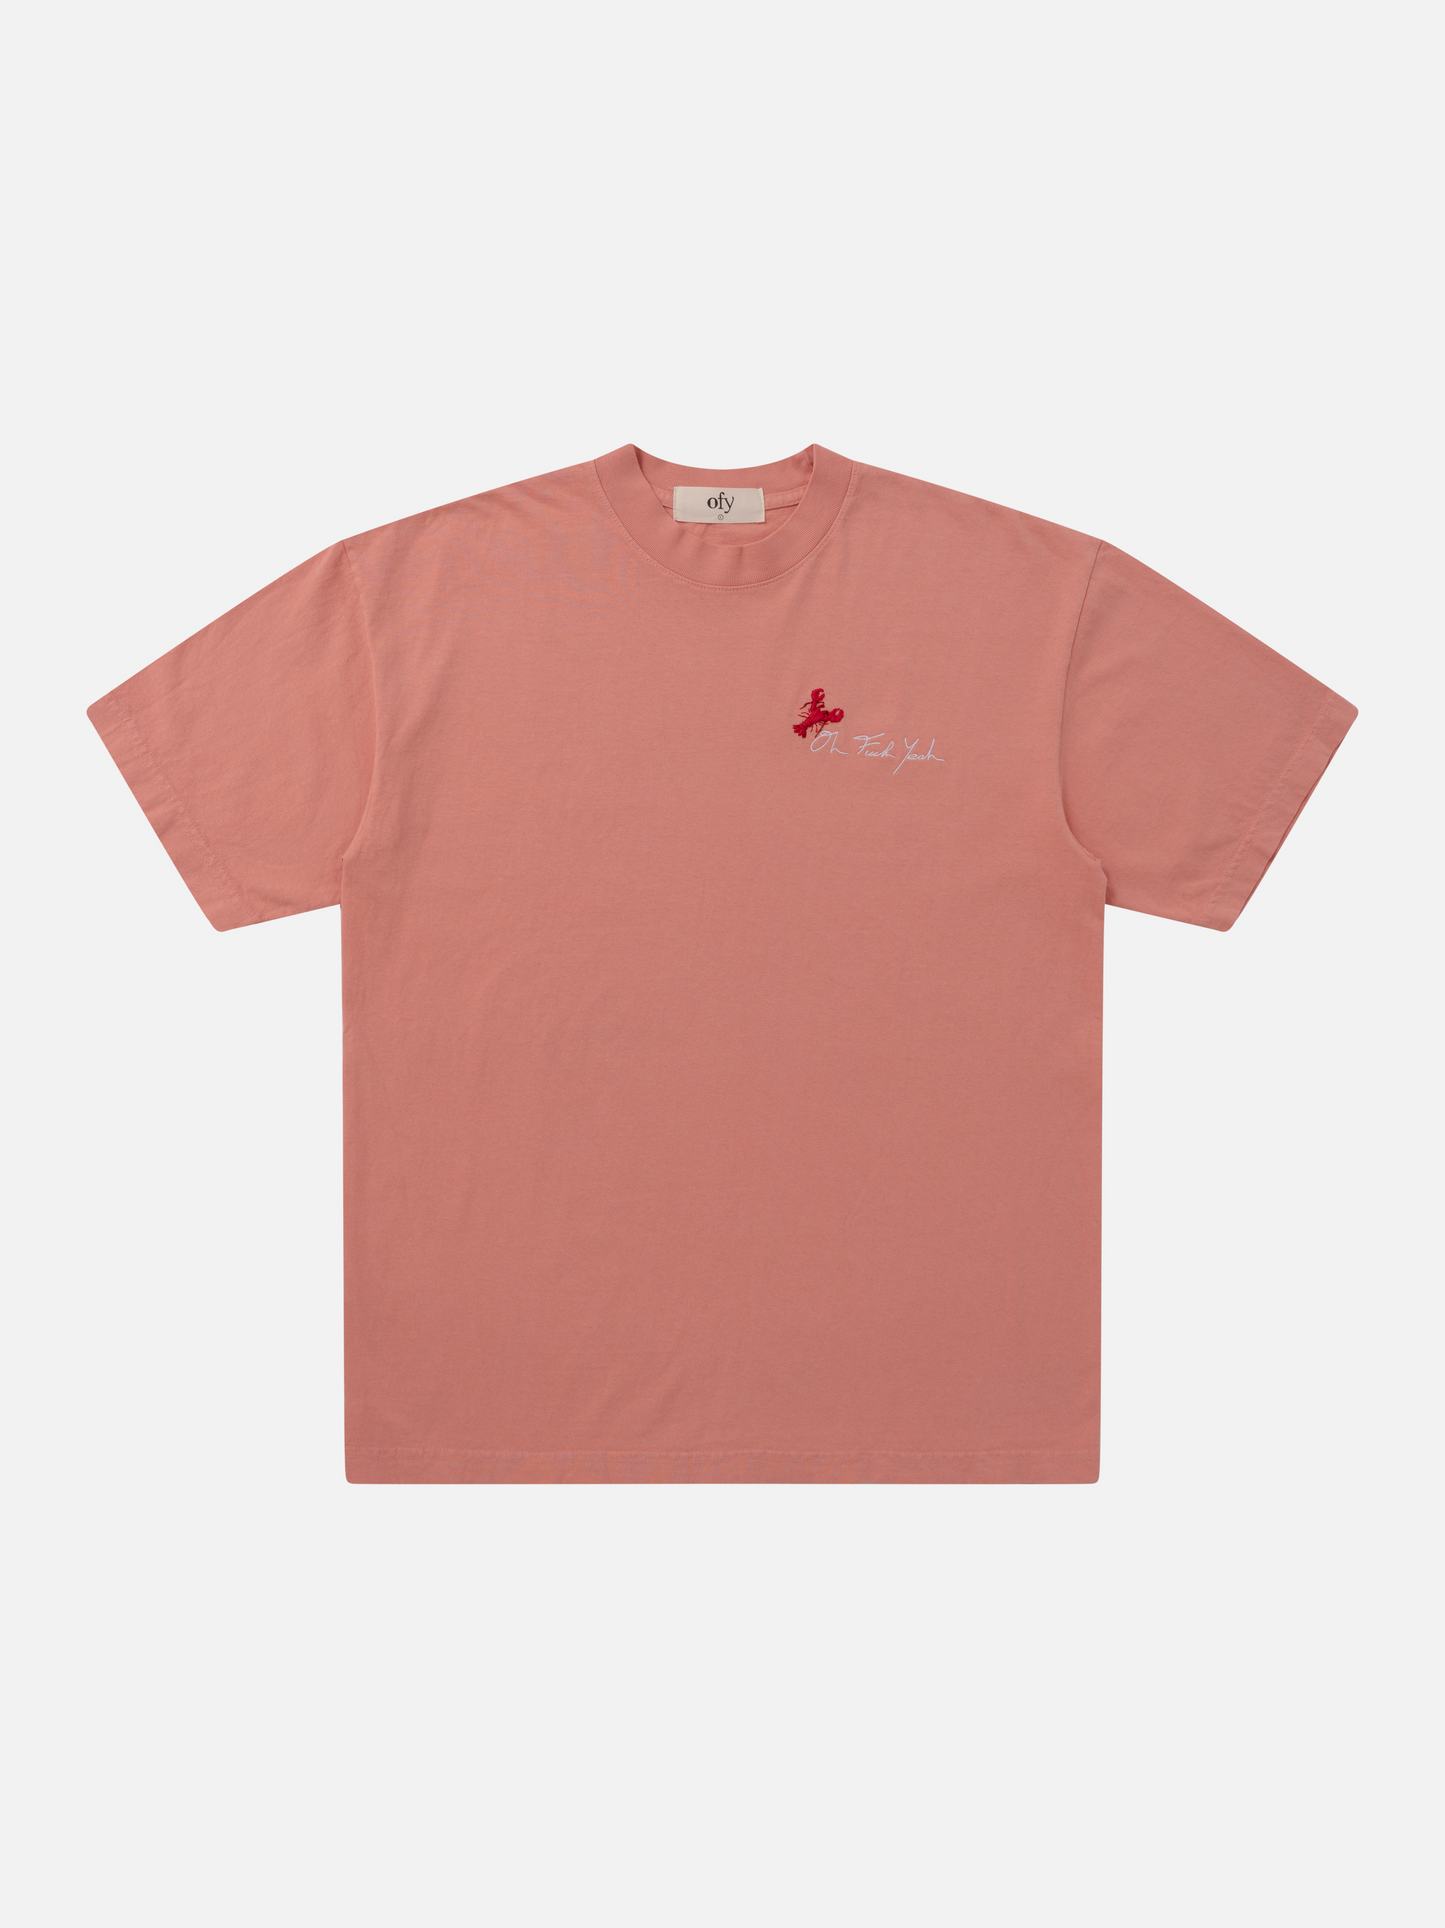 Classic Tee - Lobster Embroidery